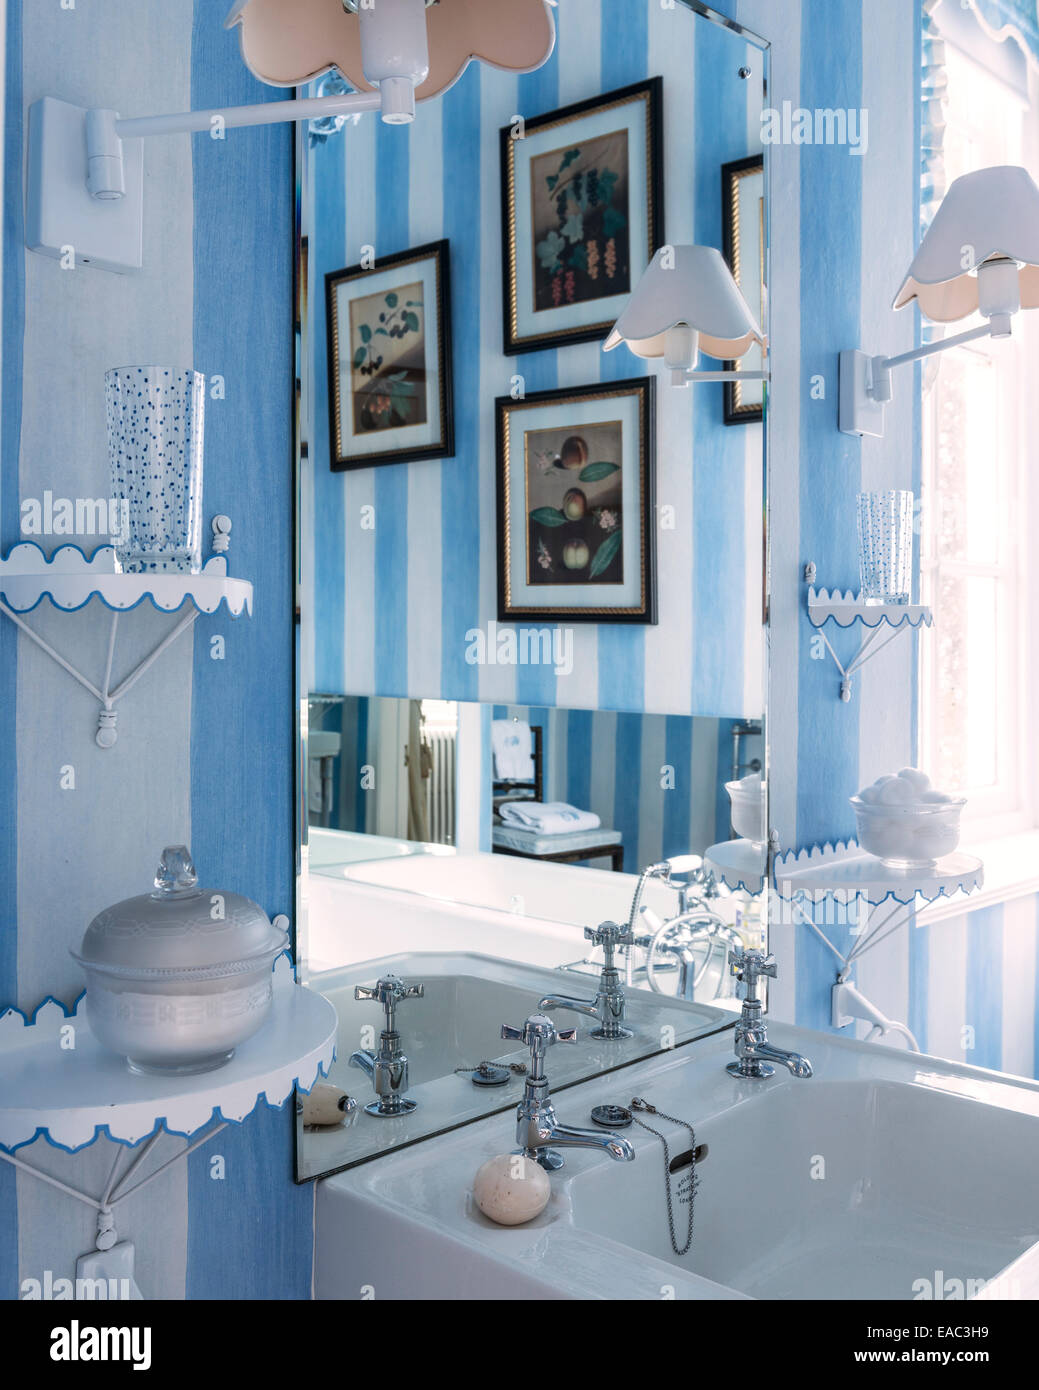 Blue and white bathroom detail with artwork reflected Stock Photo